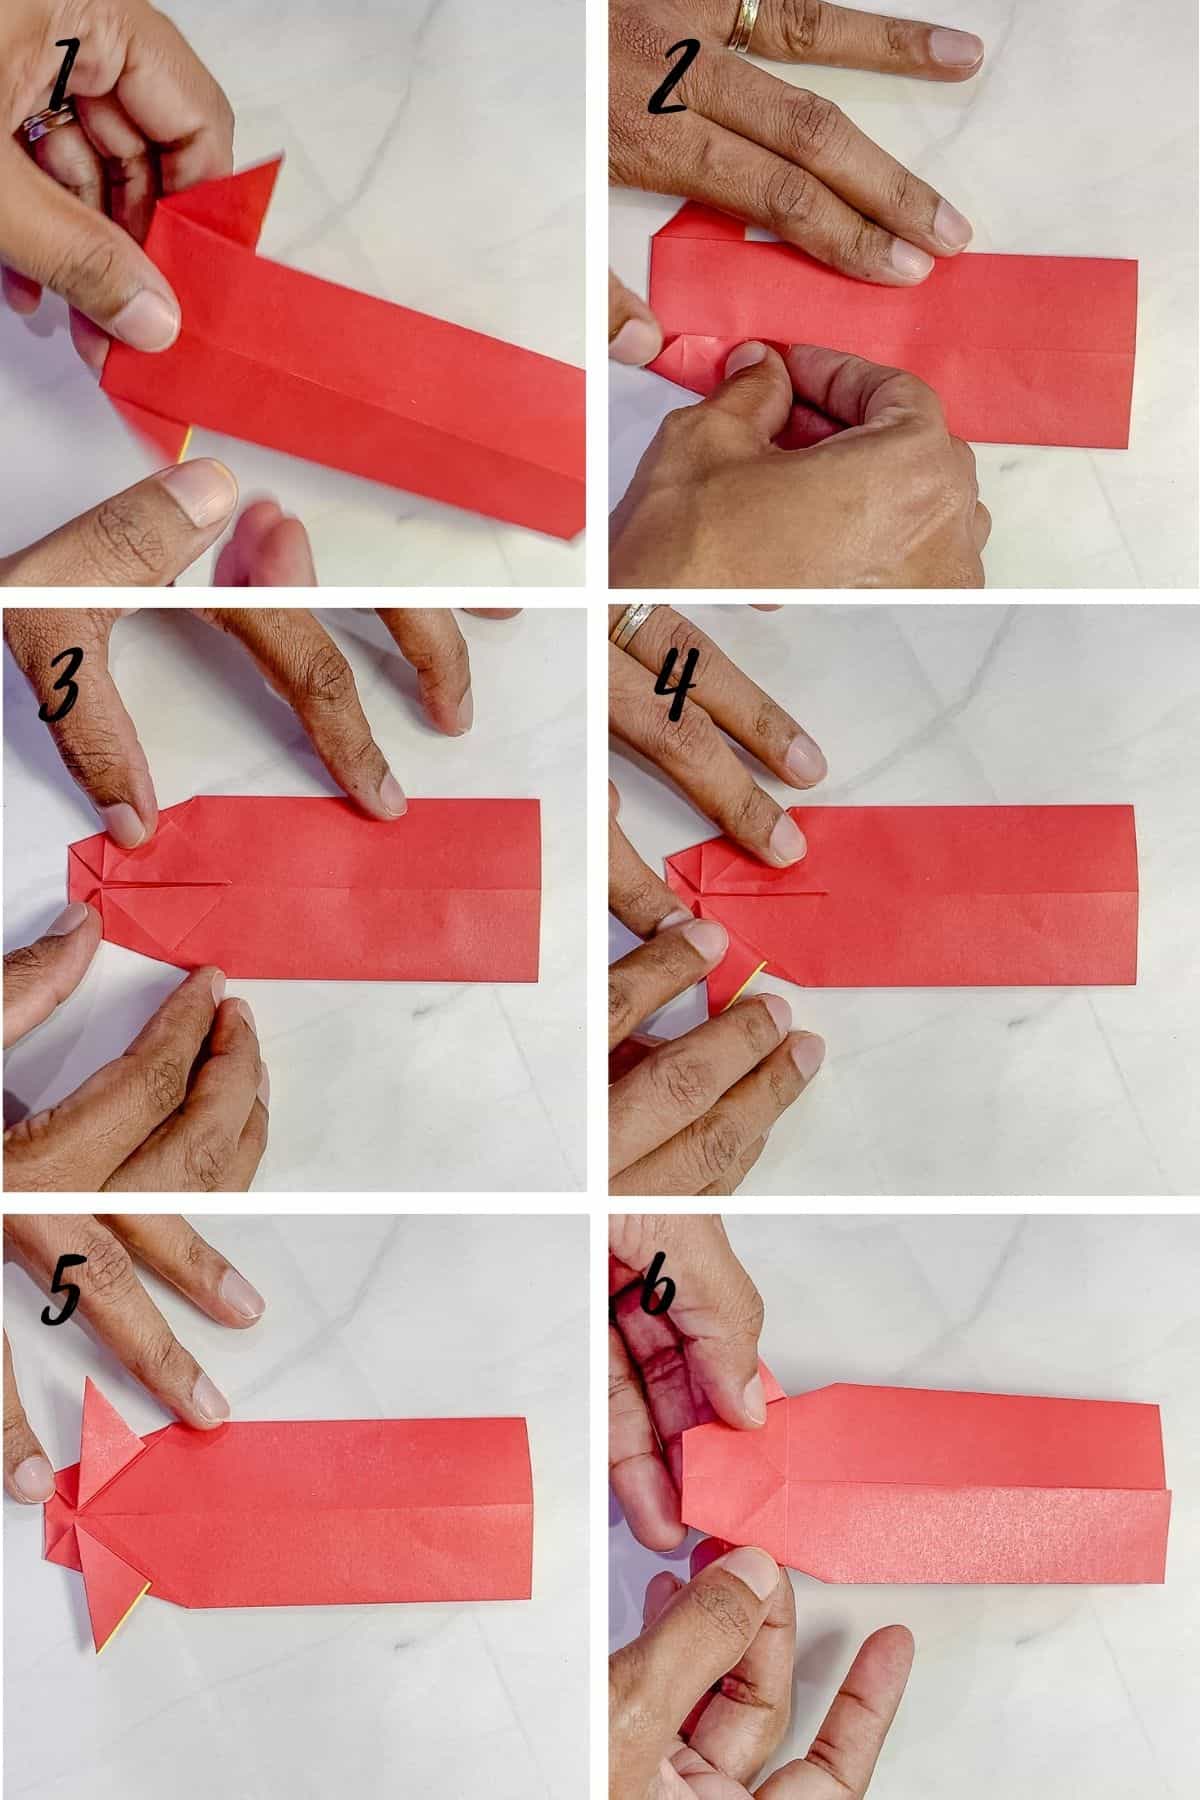 A poster of 6 images showing how to fold a red origami fish.